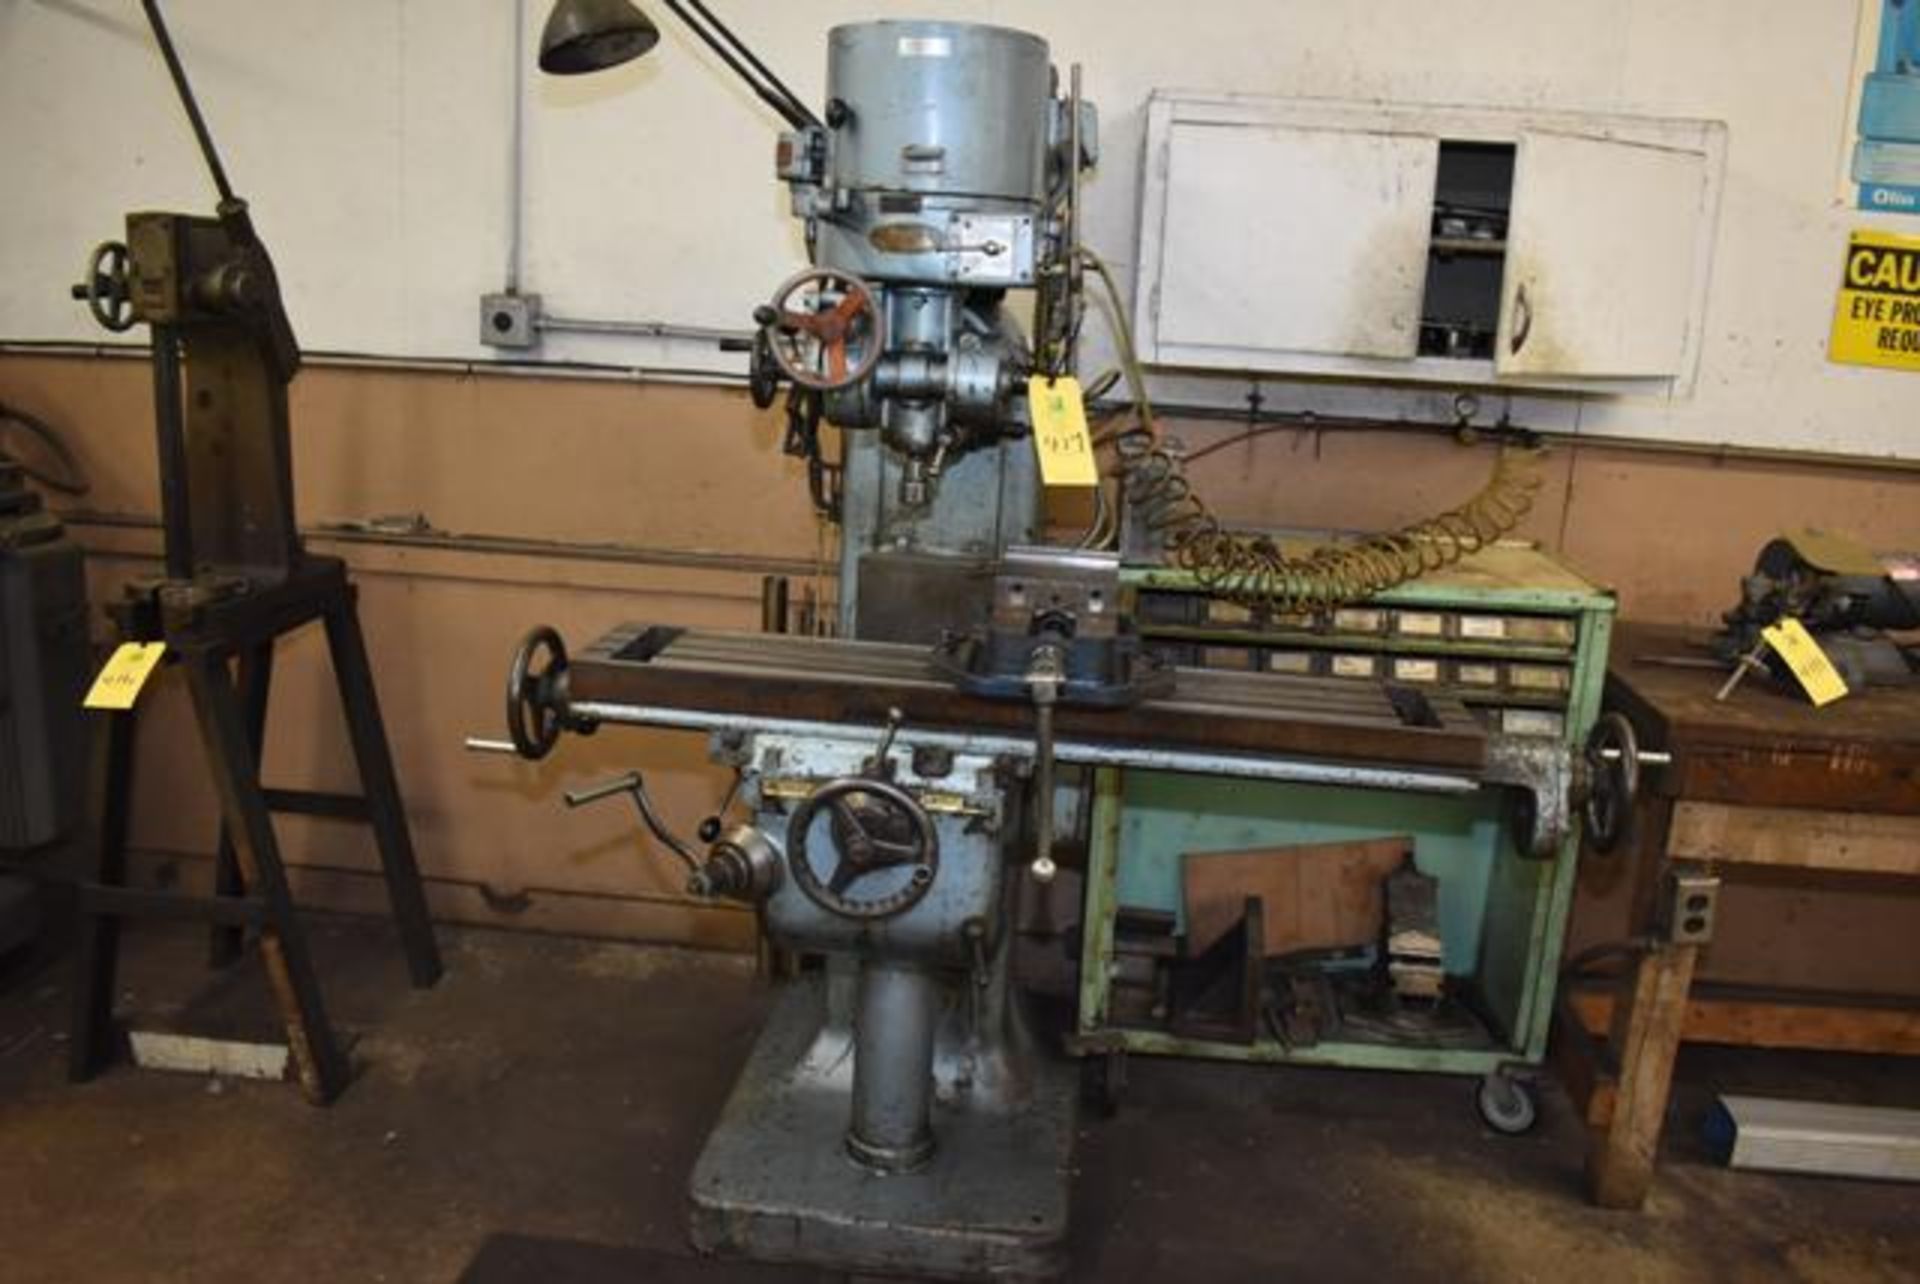 Index Model #55 Vertical Milling Machine, 9" x 46" Table, Machine Vise, SN 55-8209, Cabinet w/ - Image 2 of 3